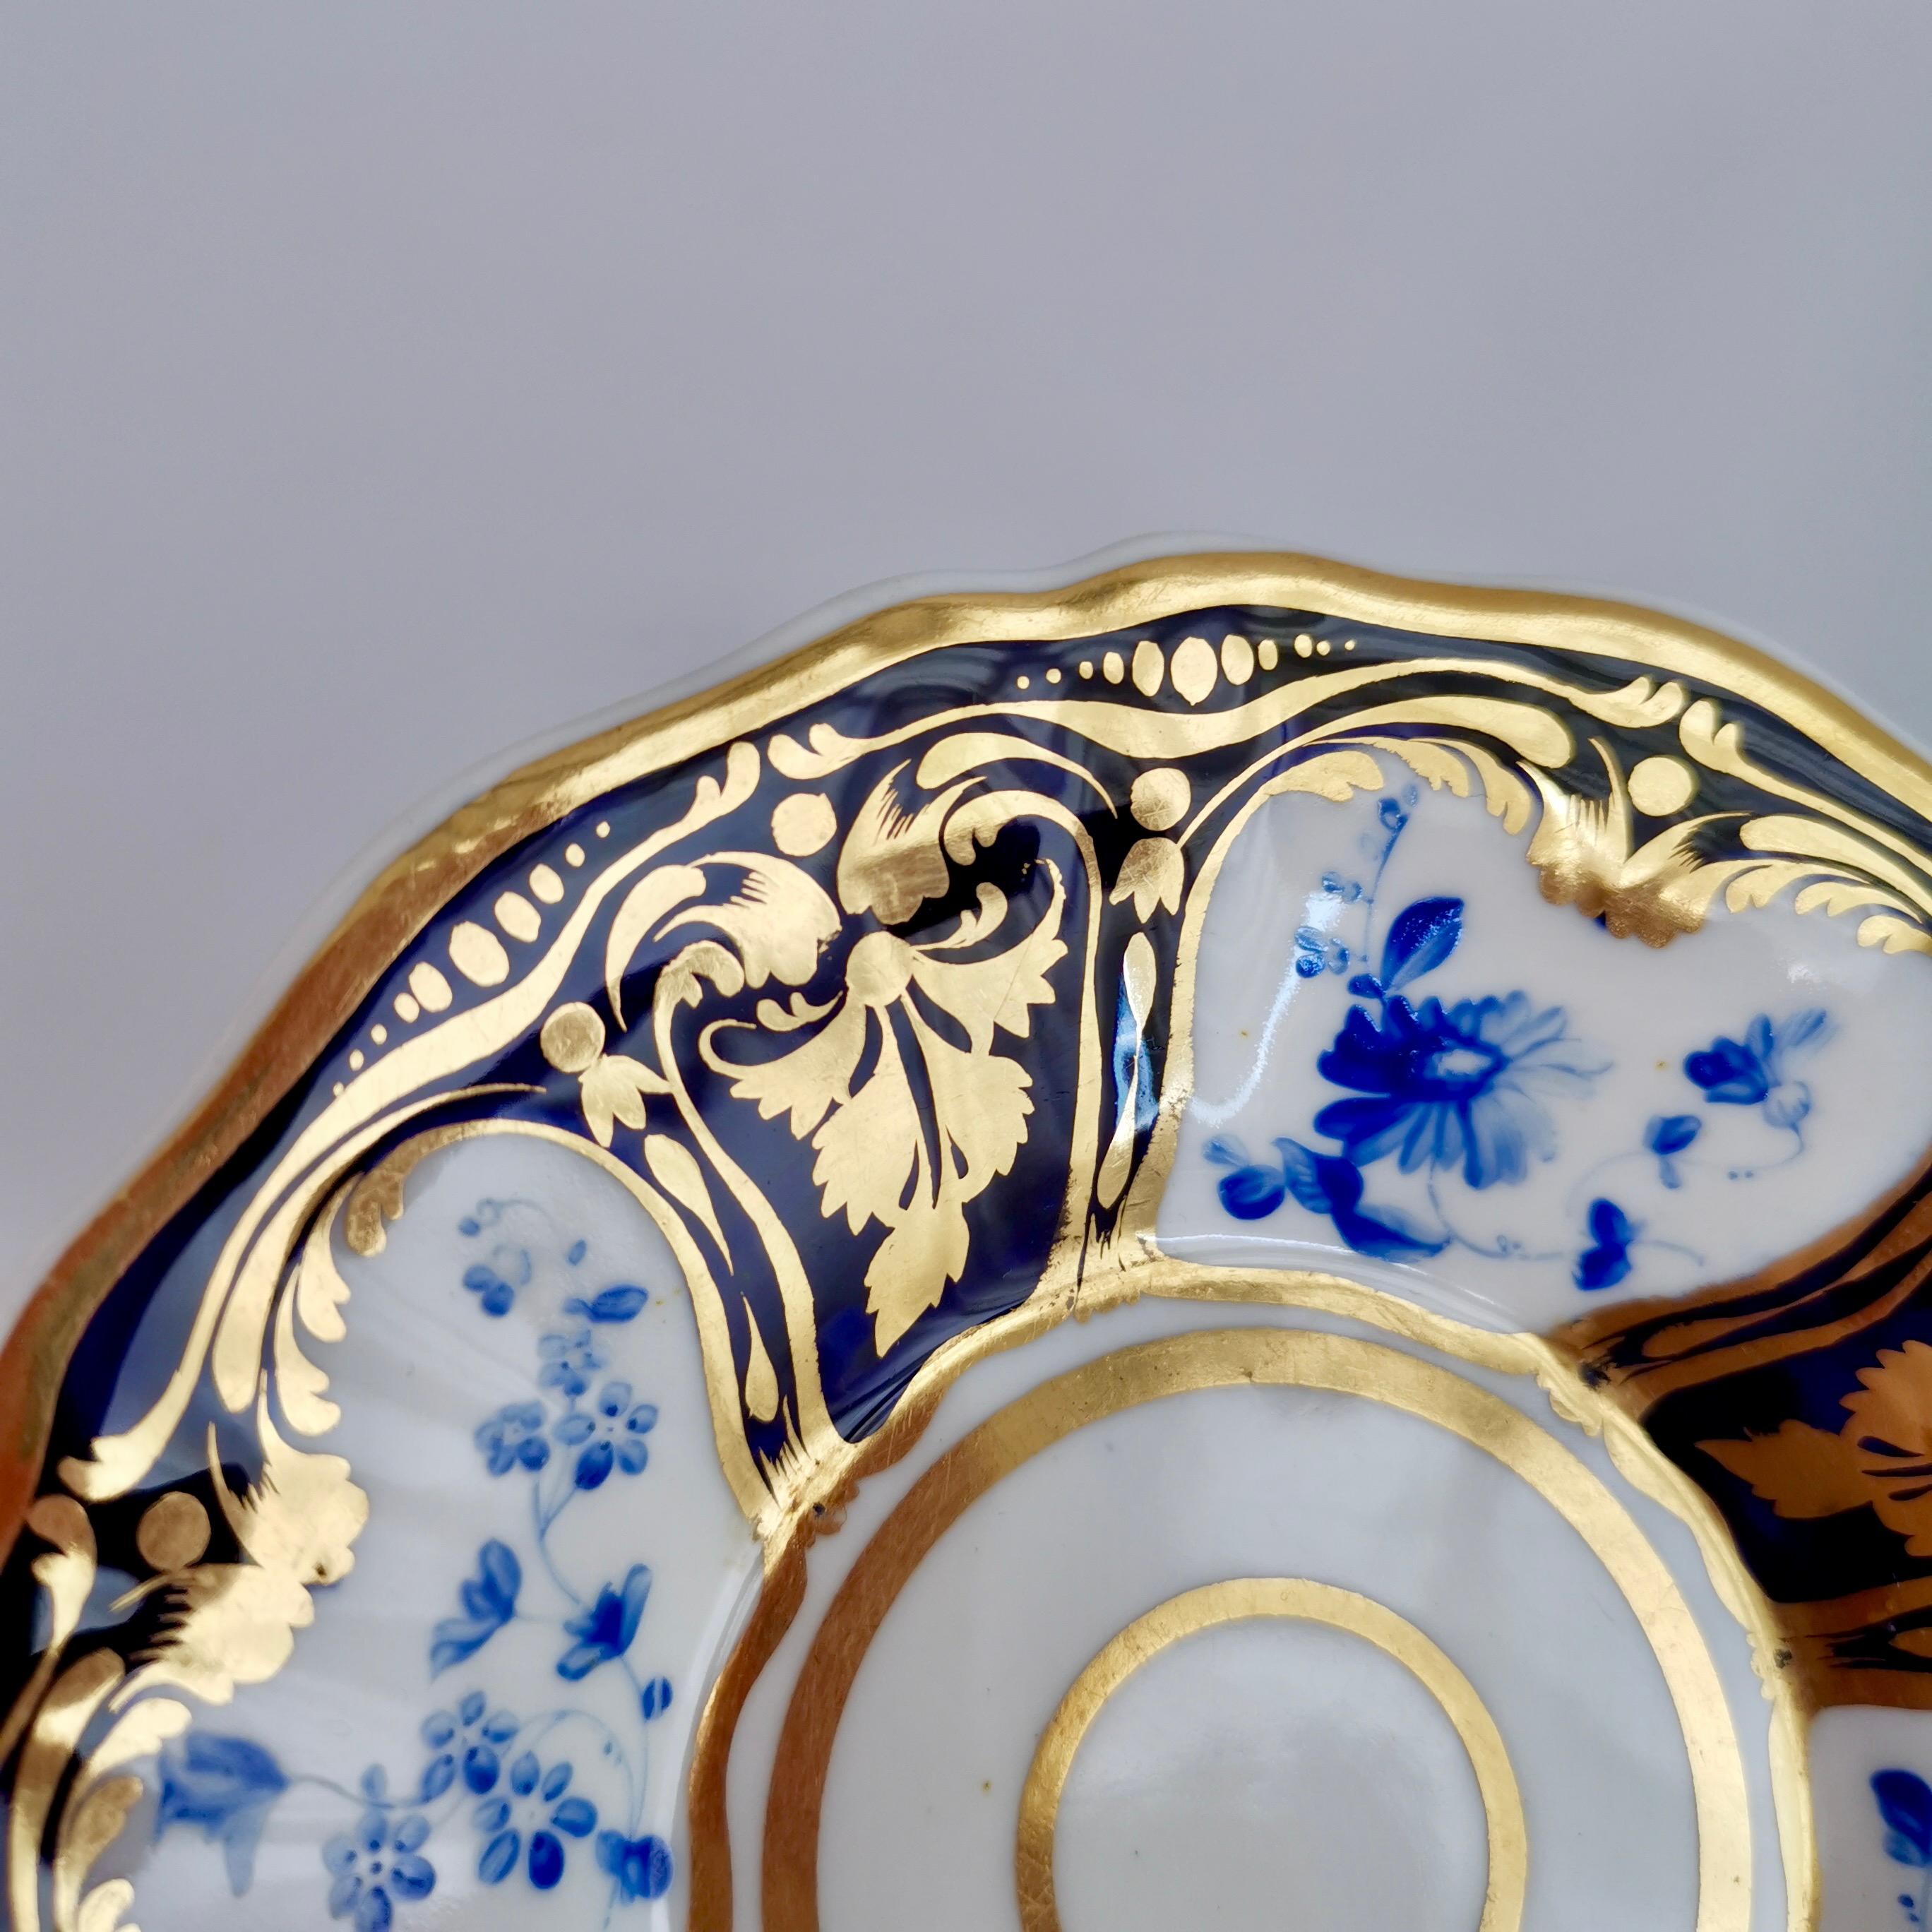 Early 19th Century Ridgway Porcelain Teacup and Saucer, Blue Flowers and Gilt, Regency, Ca 1825 For Sale